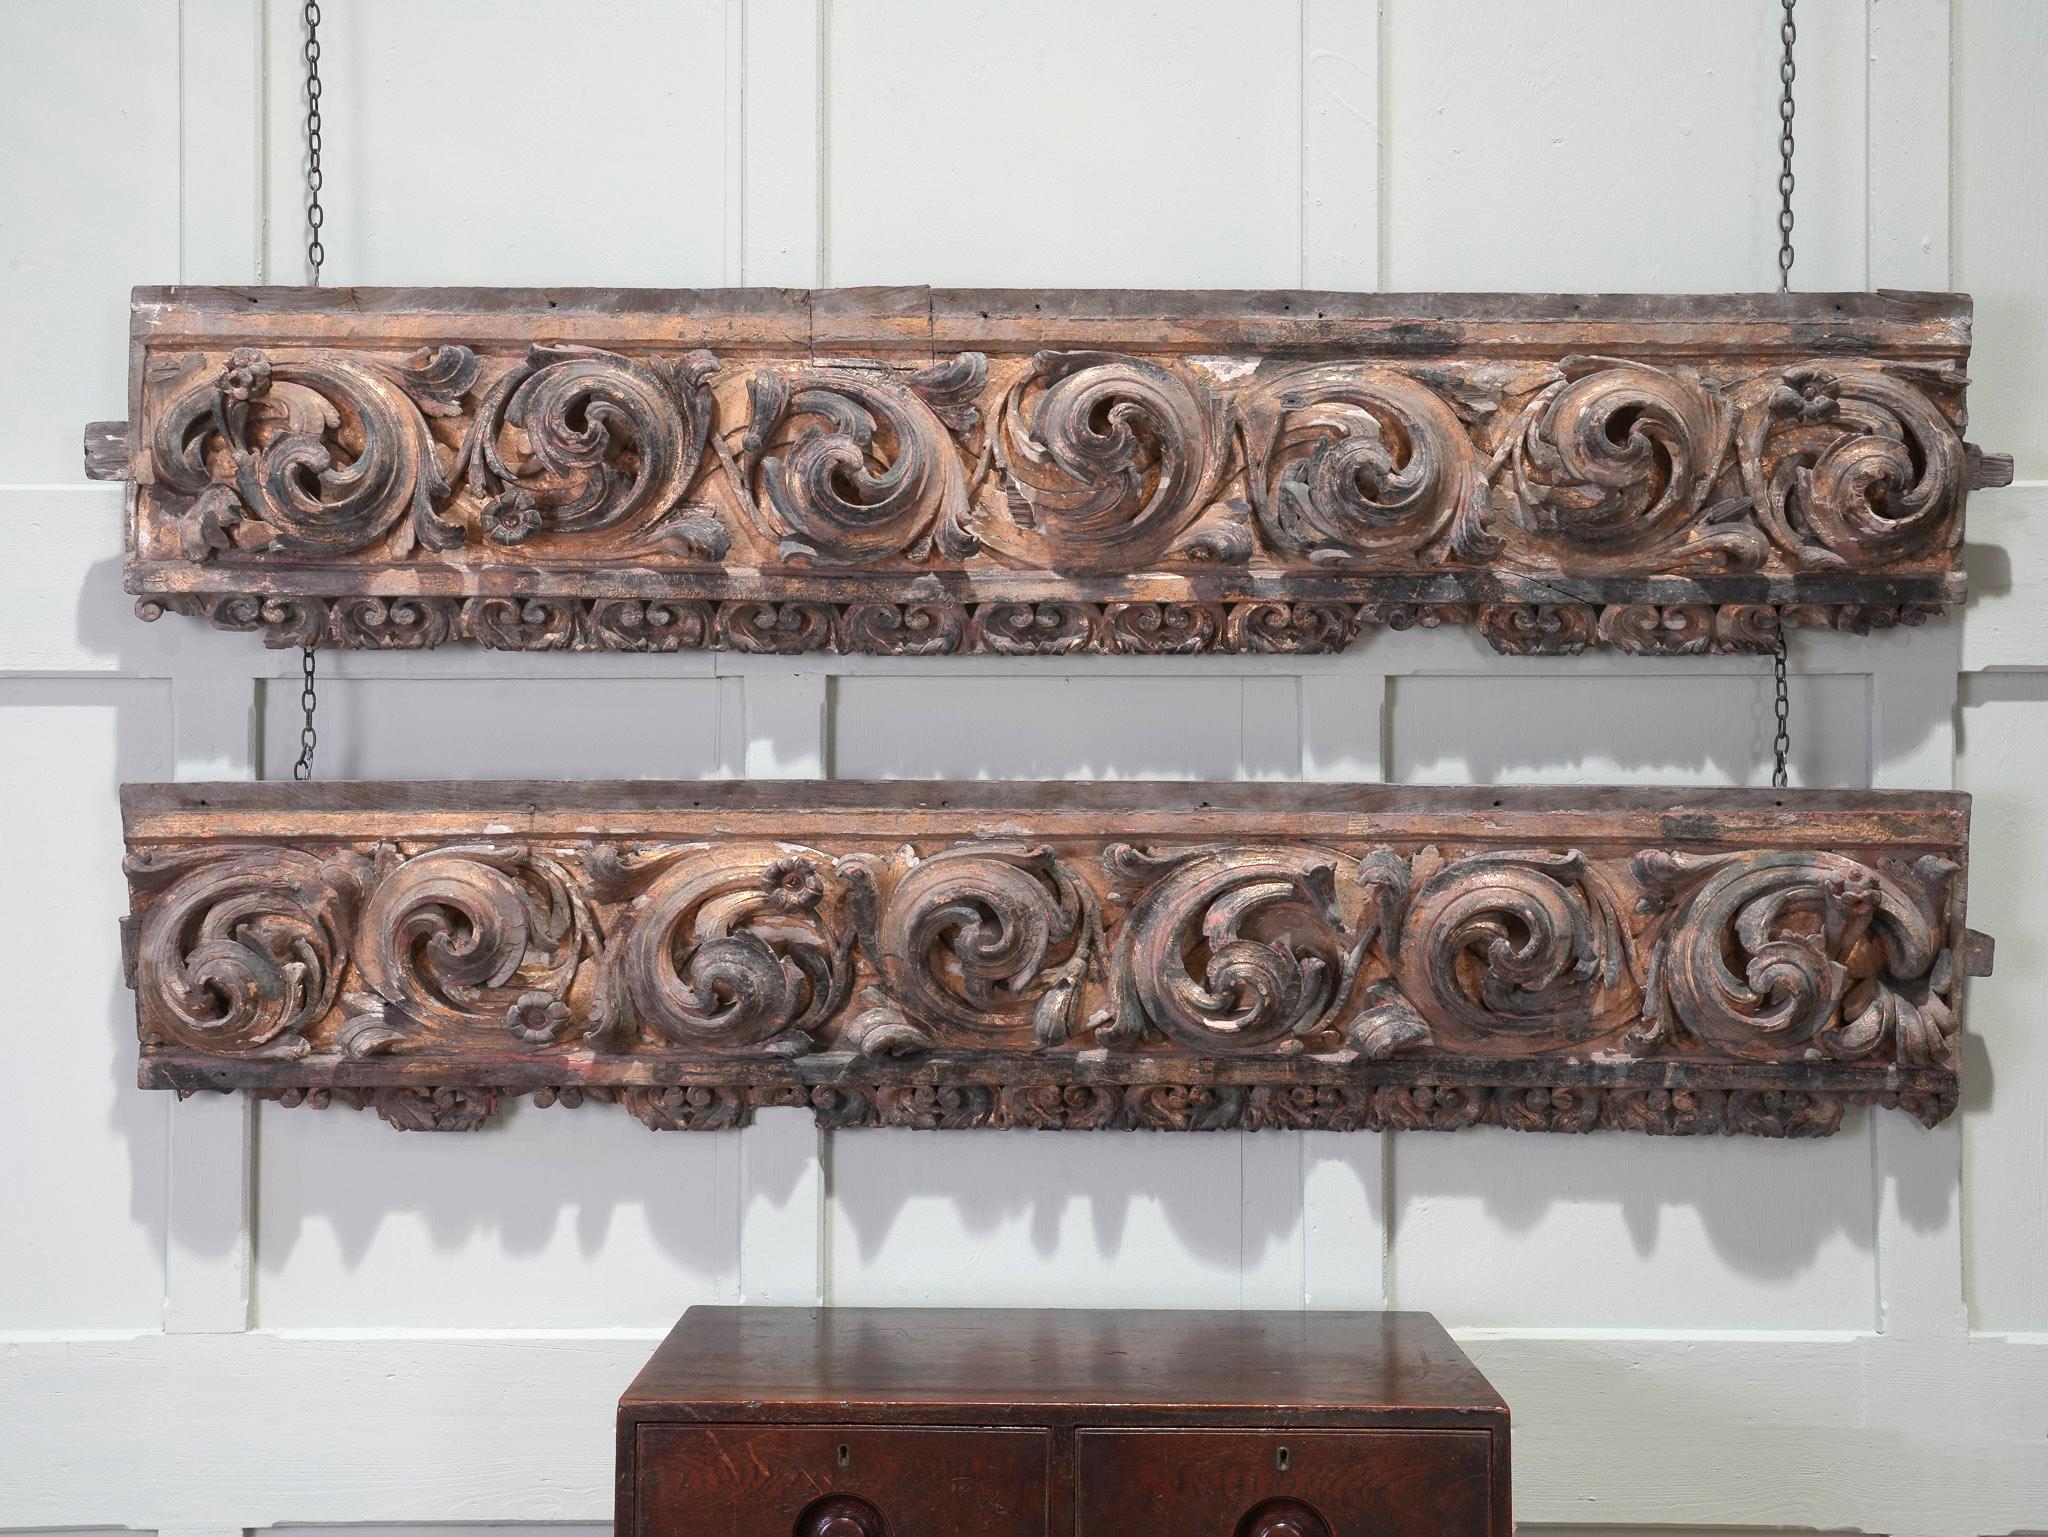 A pair of carved and gilded chestnut architectural elements.

Both vigorously carved in high relief from a single section of chestnut with its first gilded finish still in place, they are a masterpiece of the Baroque style used widely throughout